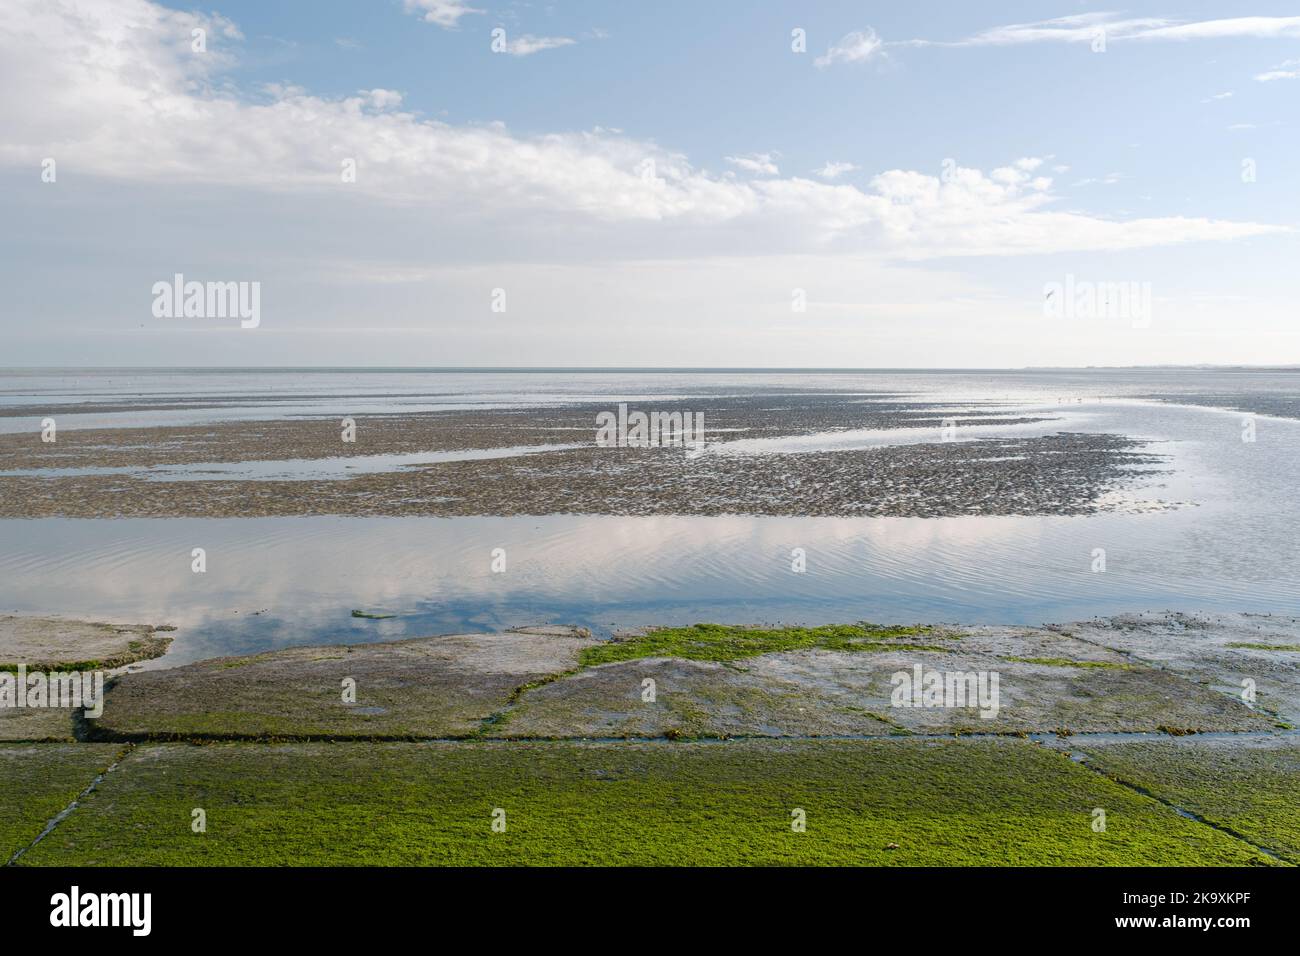 Pegwell Bay, Site of the old Hovercraft Port or Hoverport, Ramsgate, Kent, UK Stock Photo